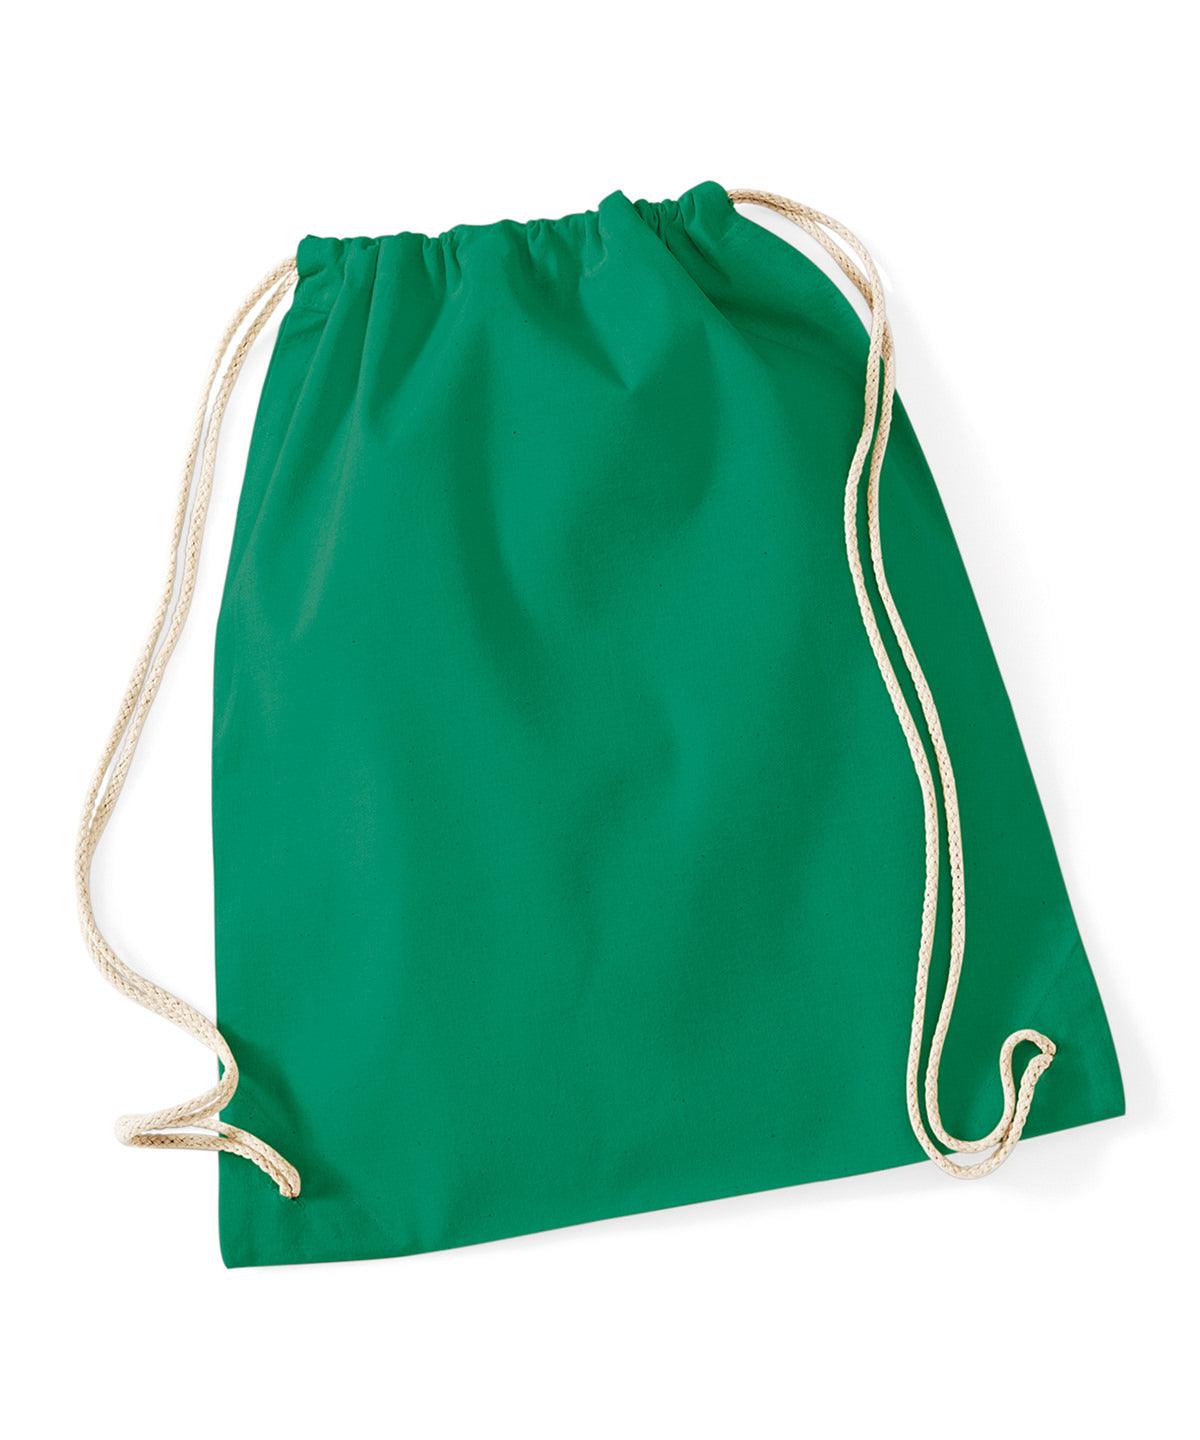 Kelly Green - Cotton gymsac Bags Westford Mill Bags & Luggage, Junior, Must Haves, Pastels and Tie Dye Schoolwear Centres